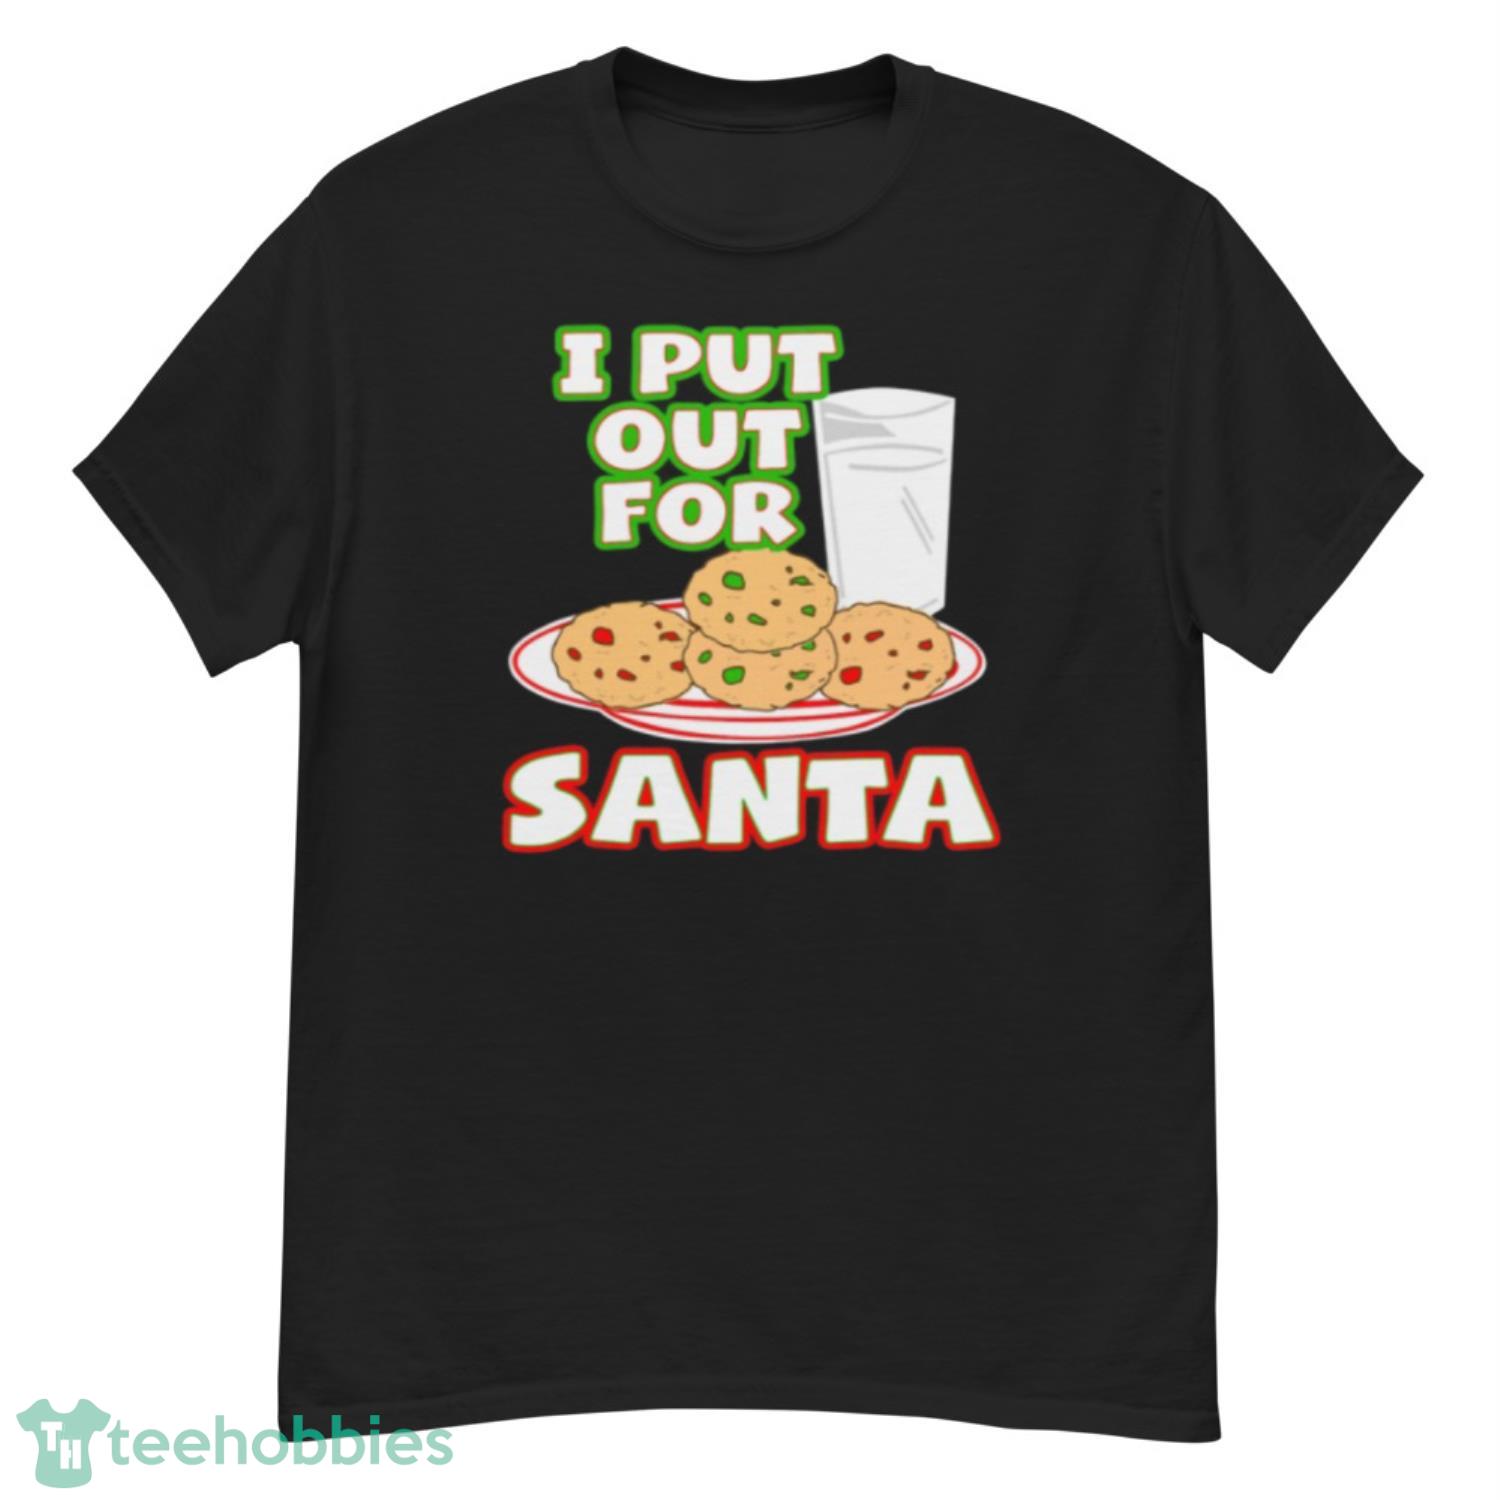 Inappropriate Christmas Shirts Funny I Put Out For Santa - G500 Men’s Classic T-Shirt